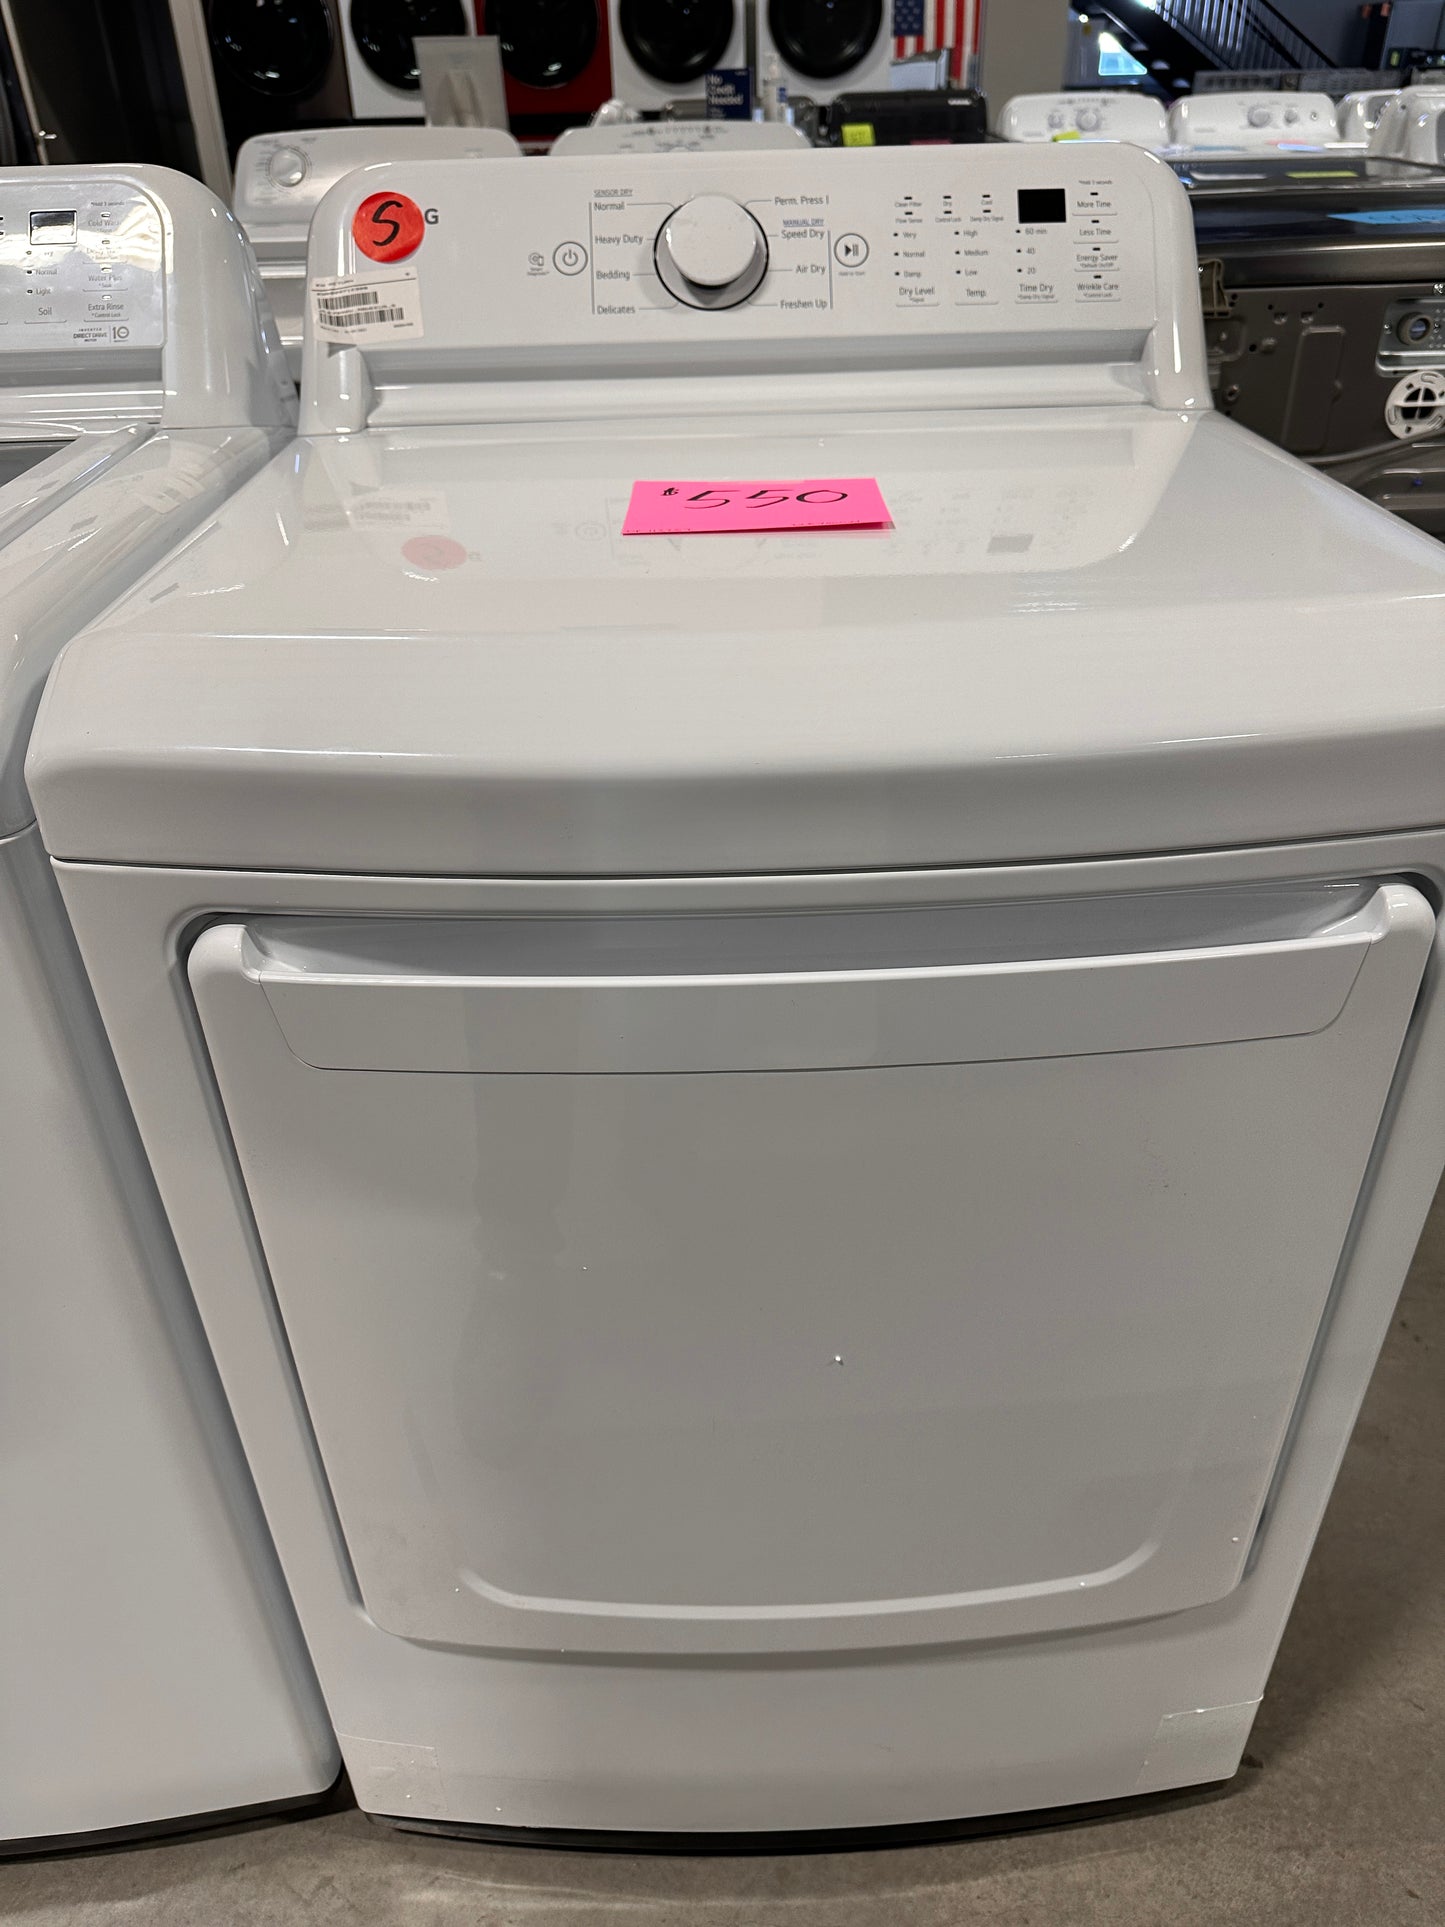 LG ELECTRIC DRYER with SENSOR DRY - DRY12257 DLE7000W